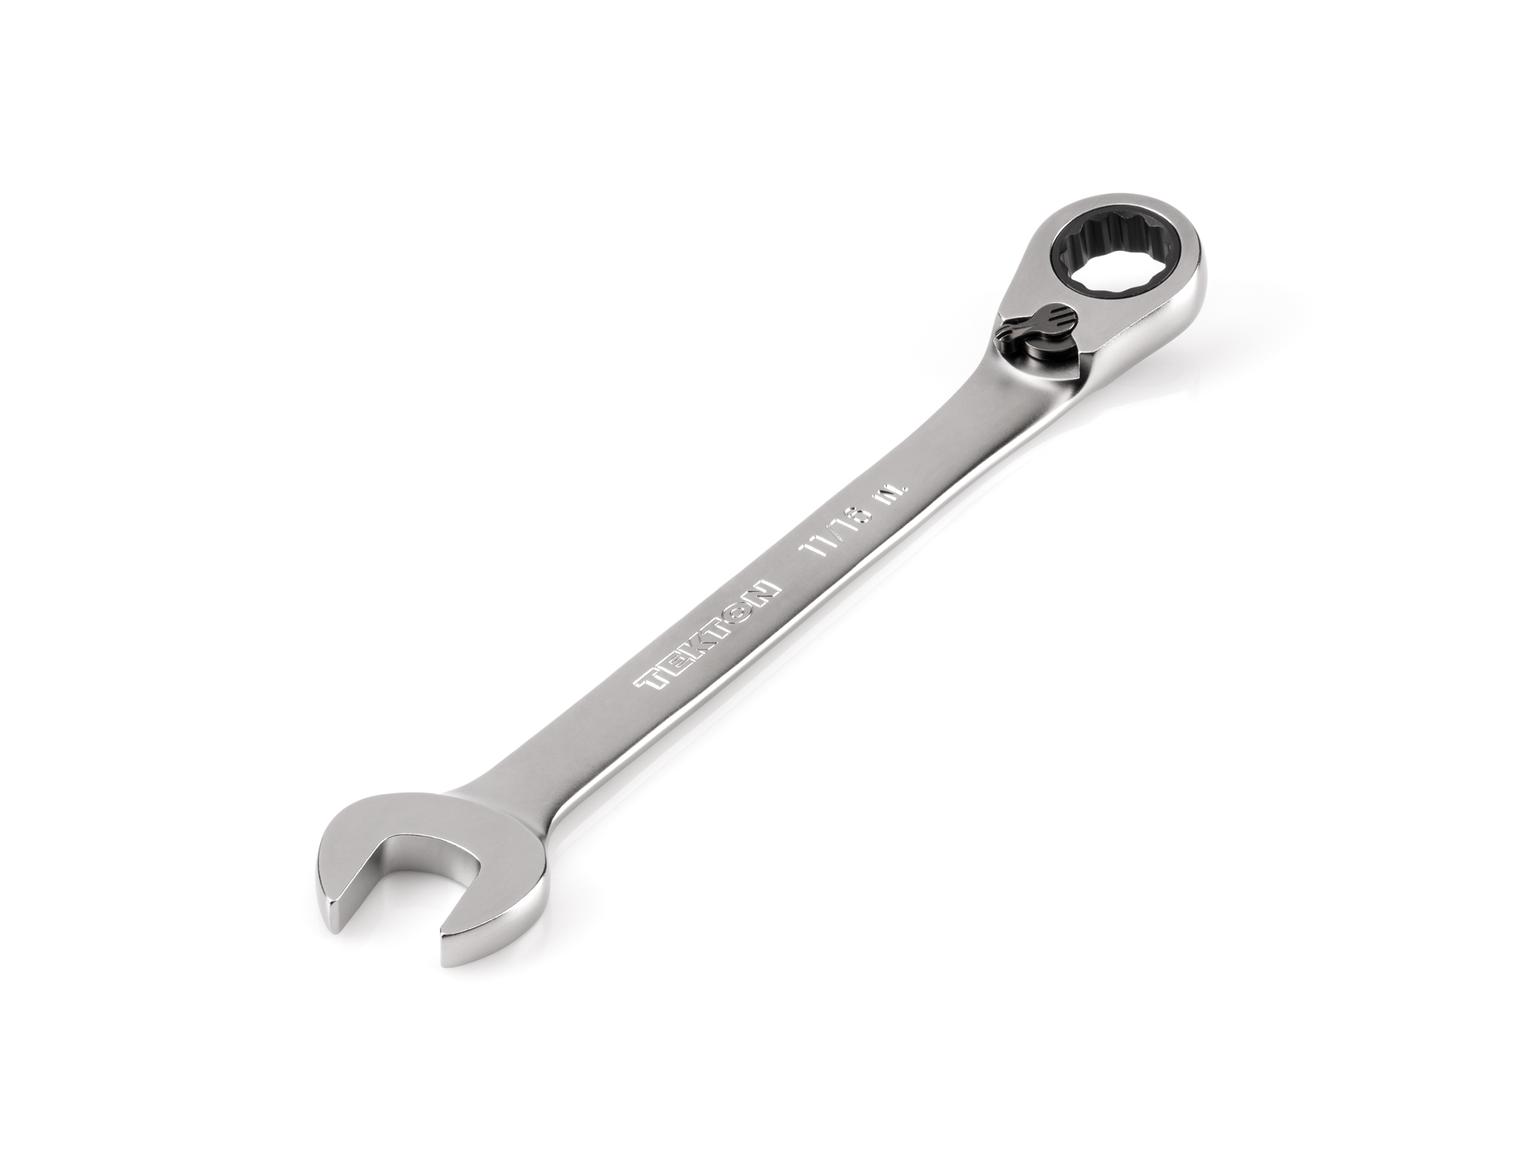 TEKTON WRC23317-T 11/16 Inch Reversible 12-Point Ratcheting Combination Wrench